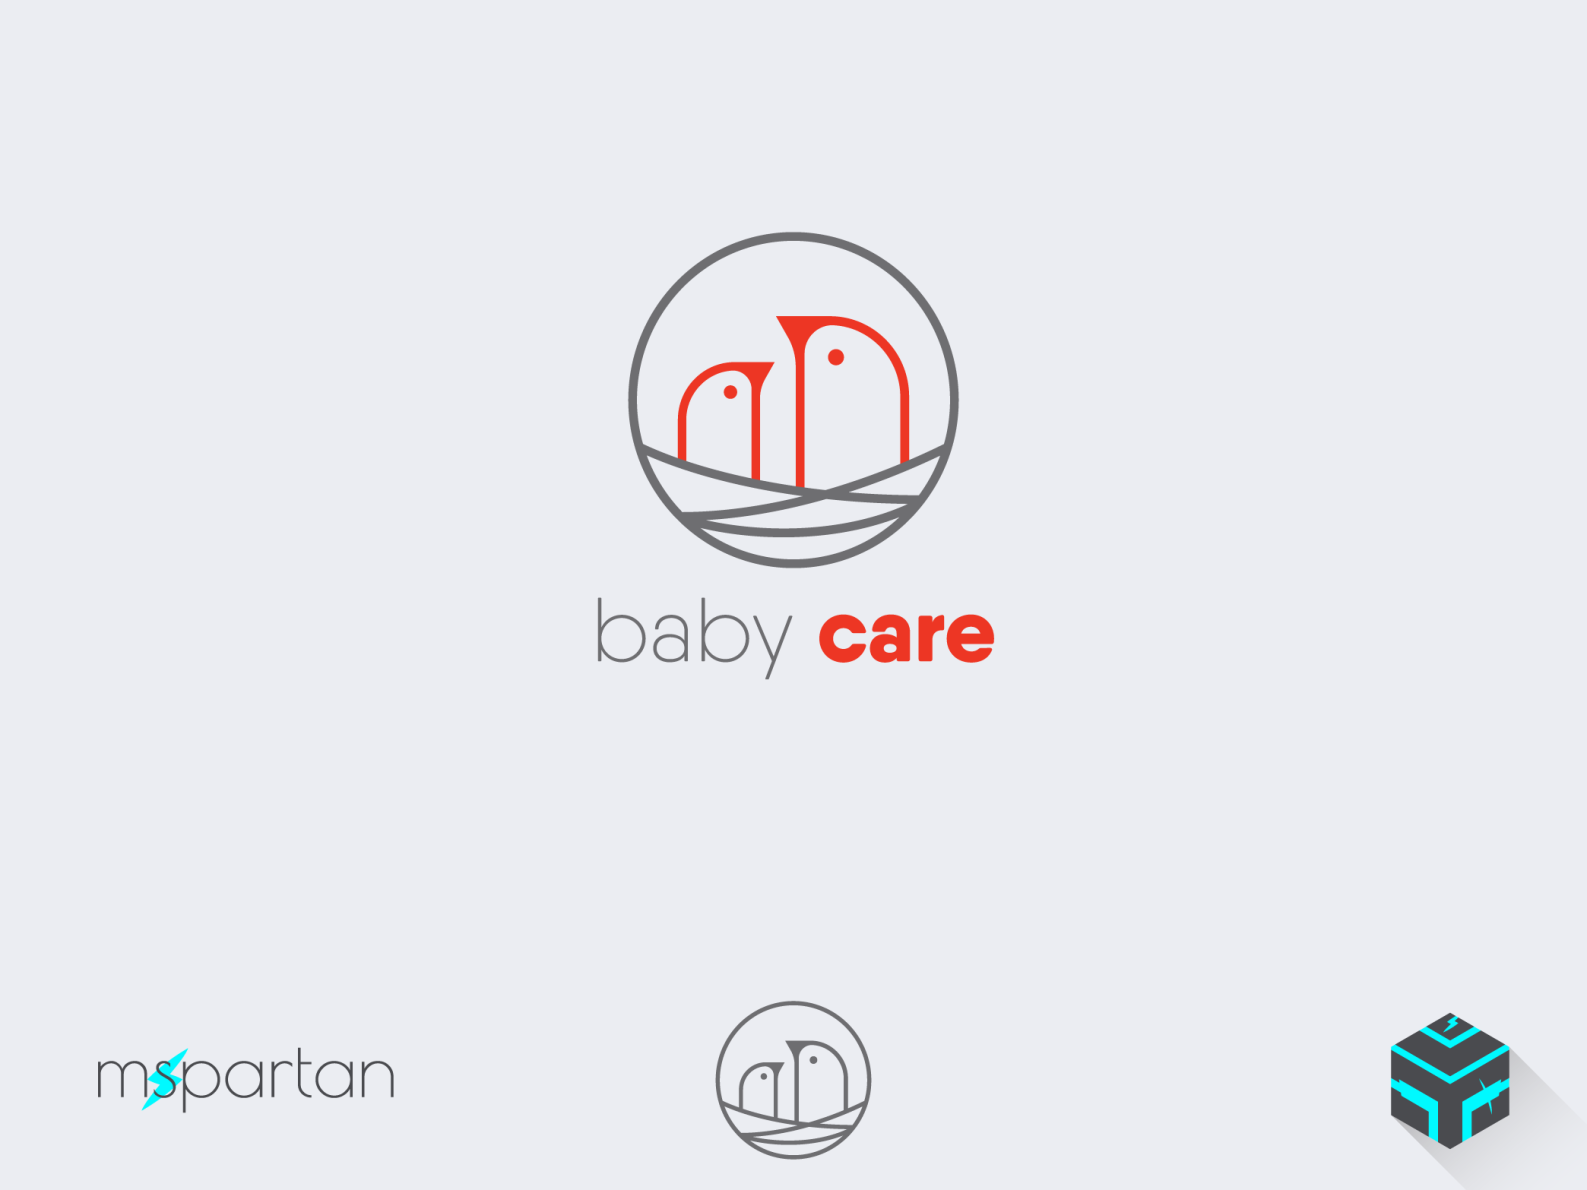 Lovely child care and nutrition logo template image_picture free download  450124943_lovepik.com